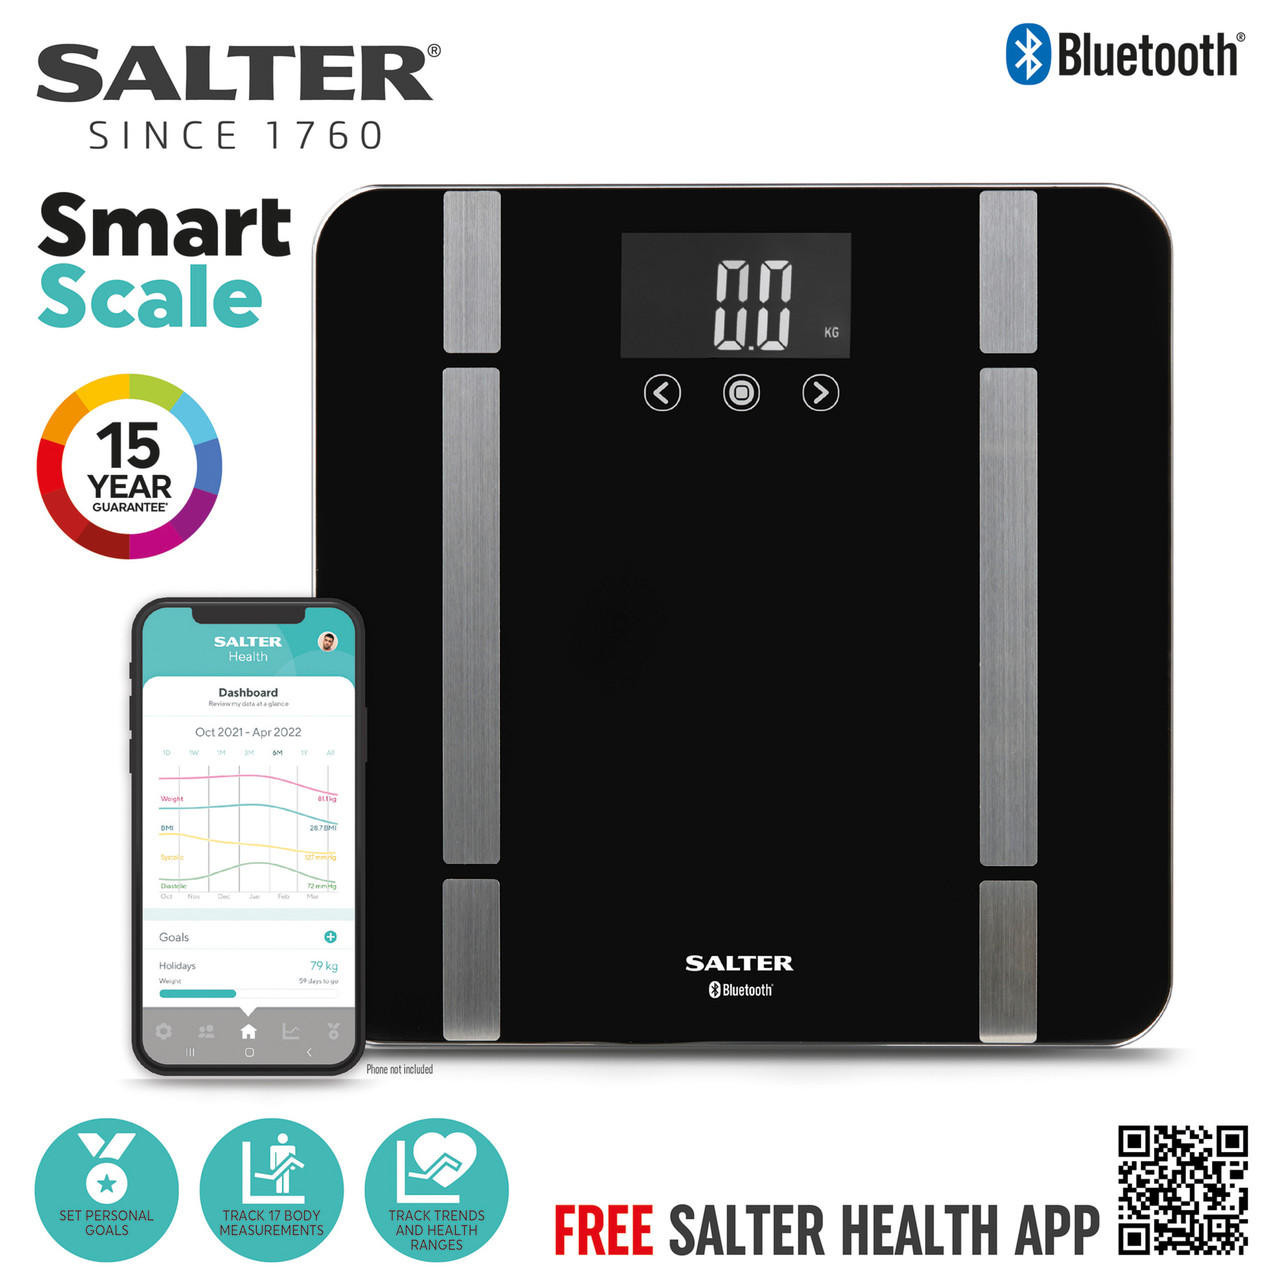 https://cdn11.bigcommerce.com/s-x0ht6cfst9/images/stencil/1280x1280/products/11365/277360/salter-smart-bathroom-scale-connects-to-app-200kg-sa00432feu6-5054061482997__82246.1698675686.jpg?c=1